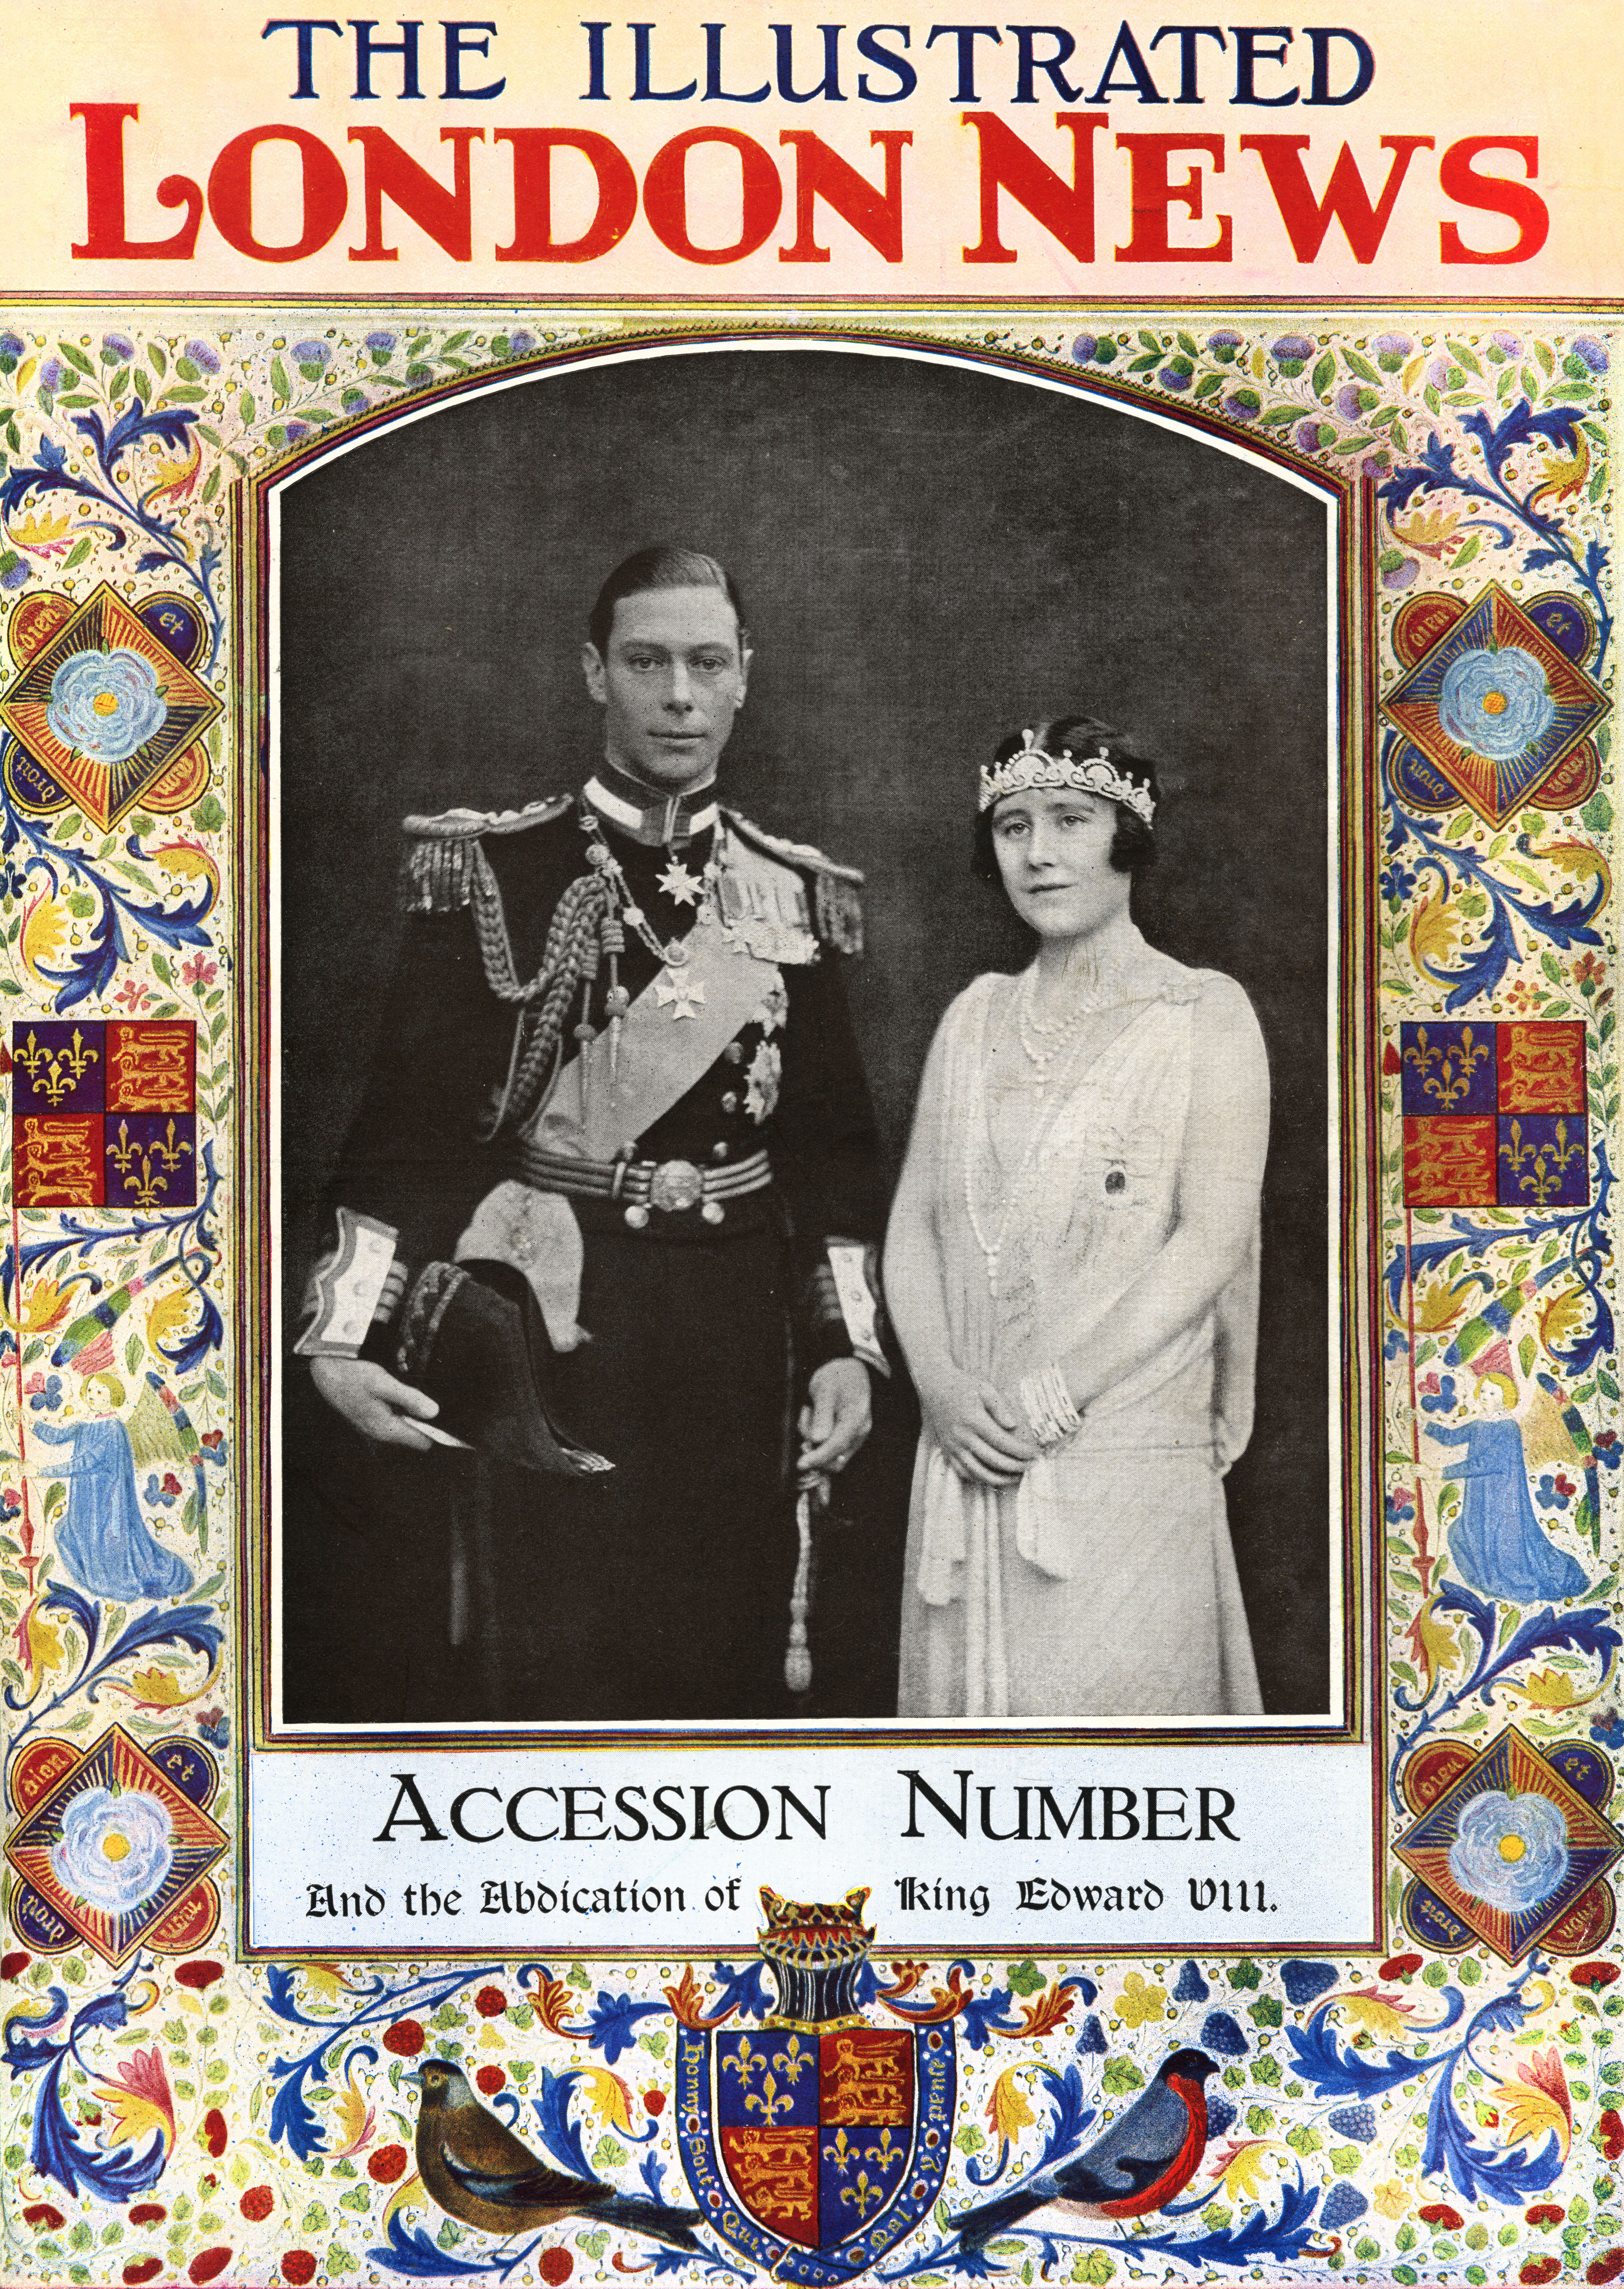 Royal photoshop - George VI Accession Issue